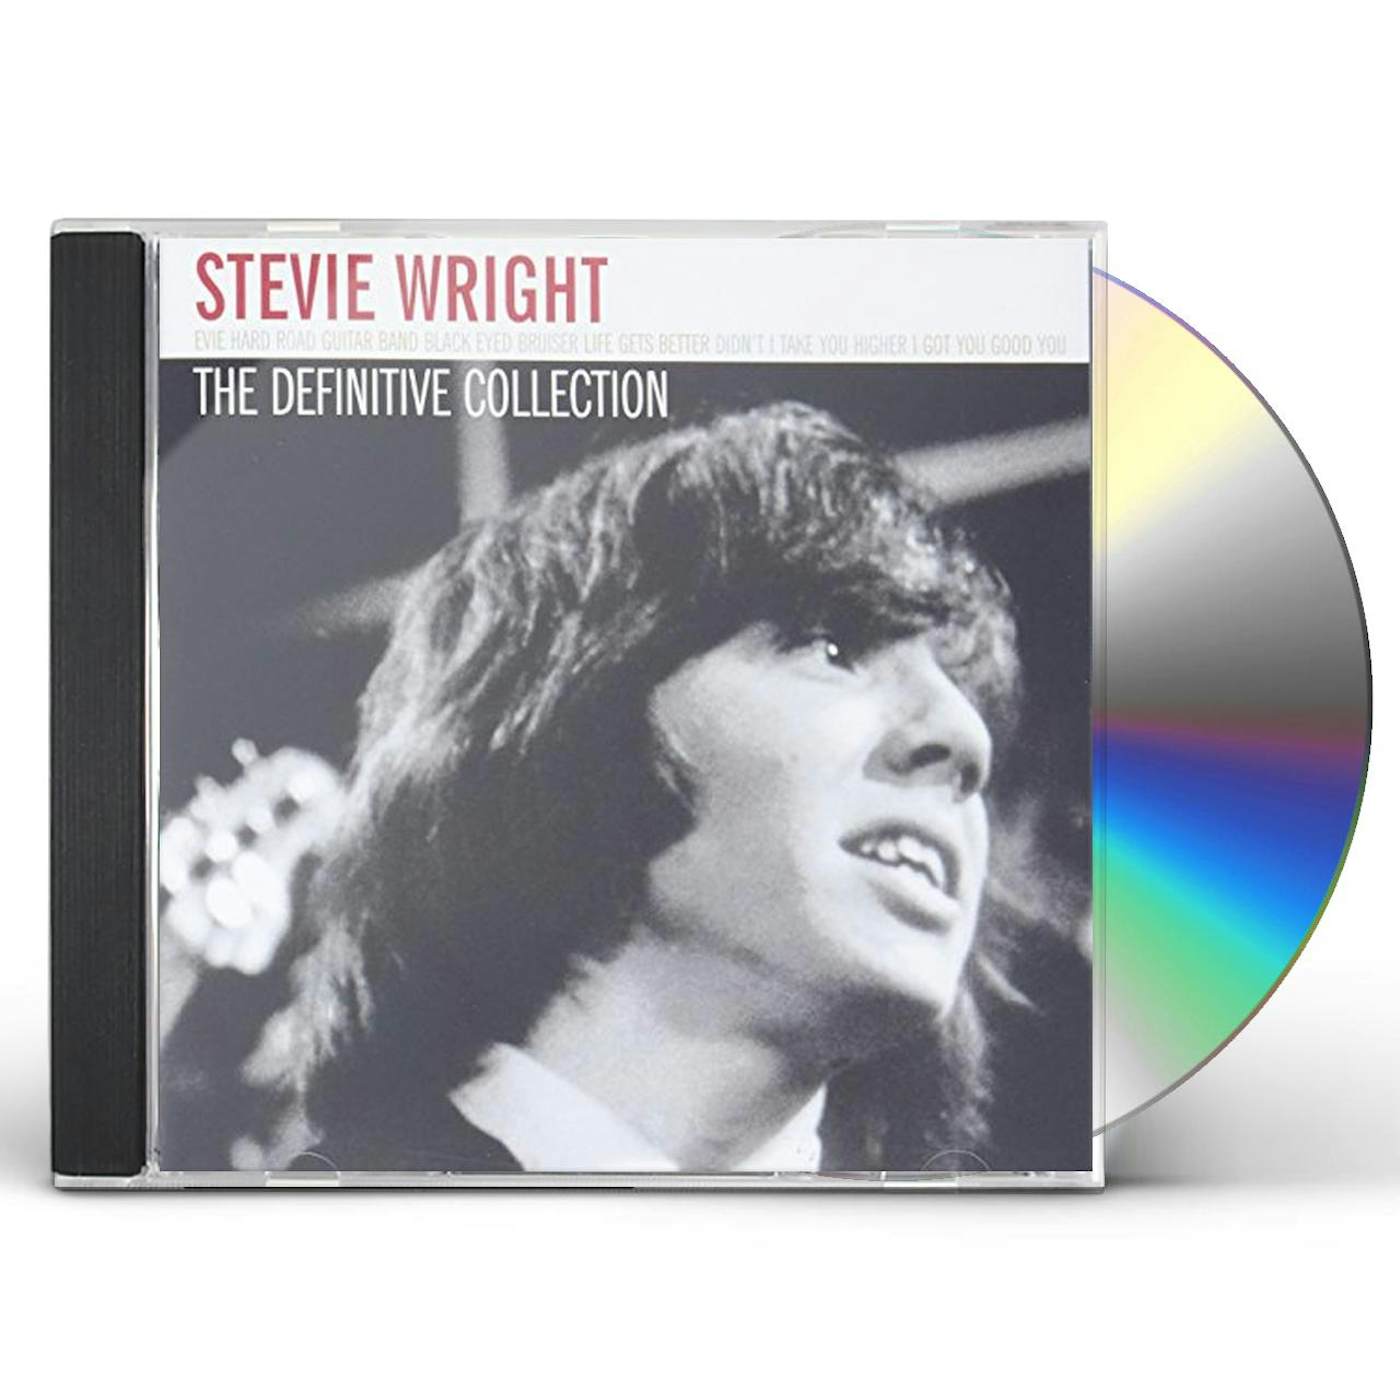 Stevie Wright DEFINITIVE COLLECTION CD